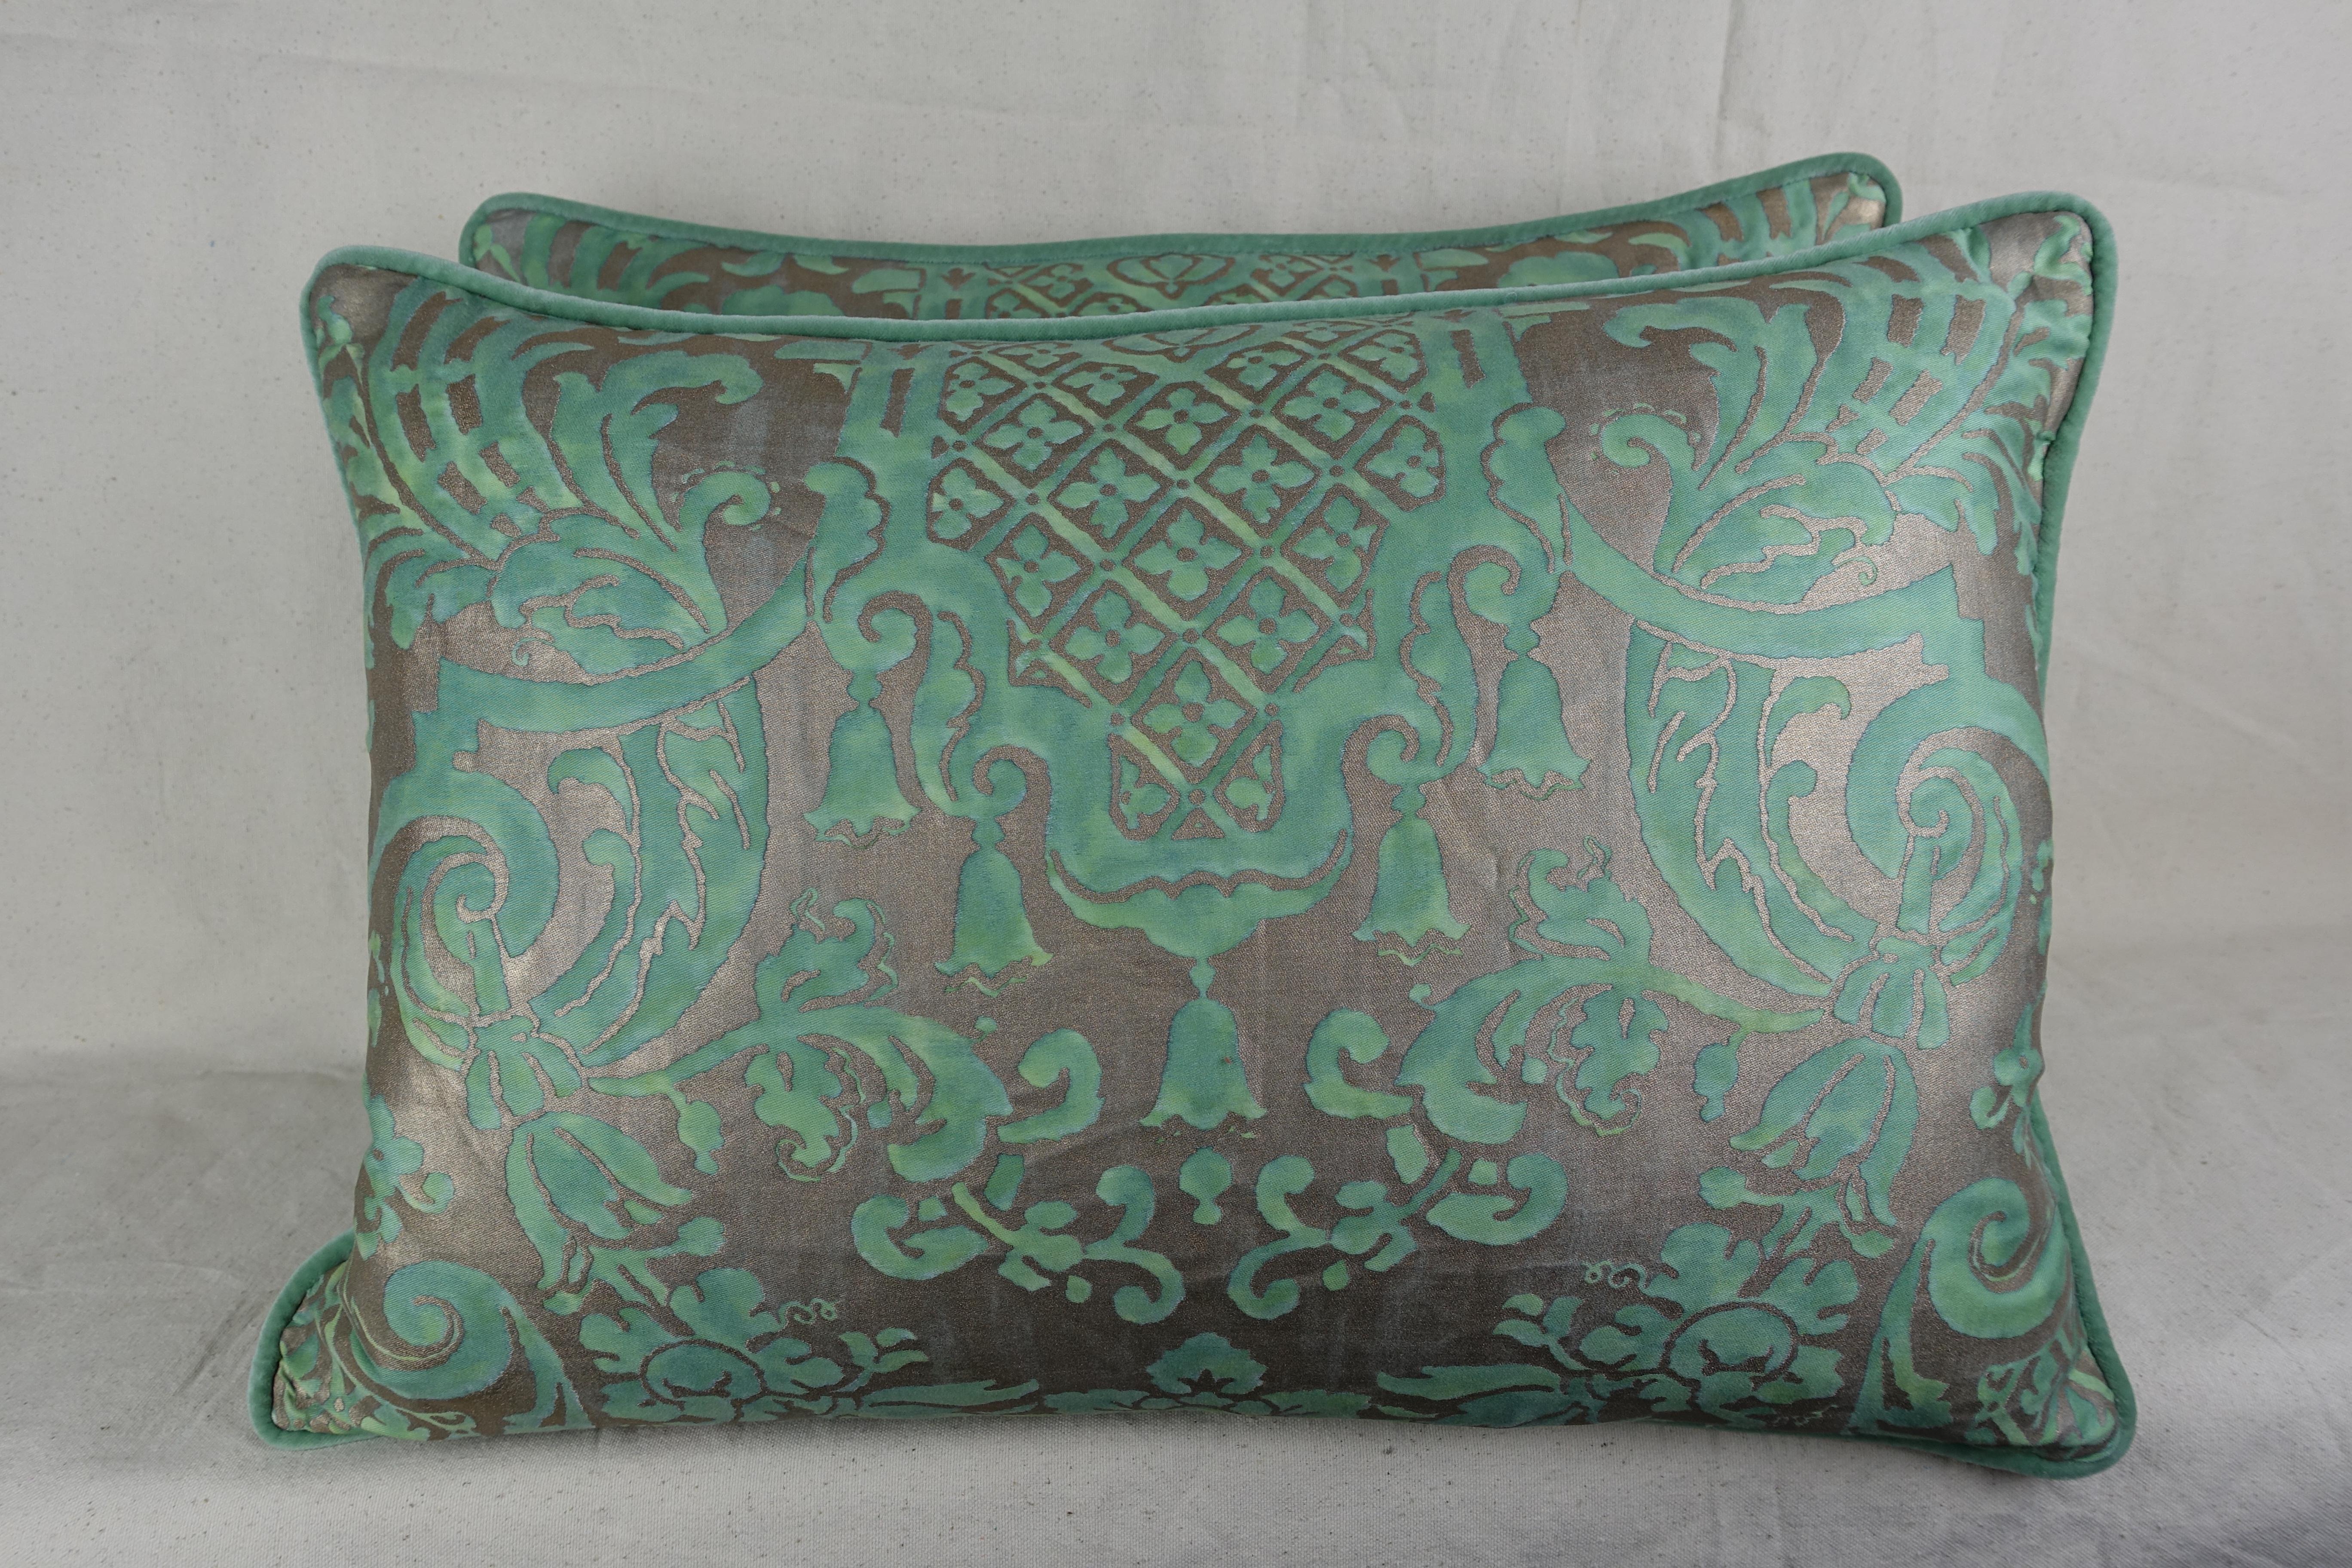 Italian Carnavalet Patterned Fortuny Pillows, a Pair